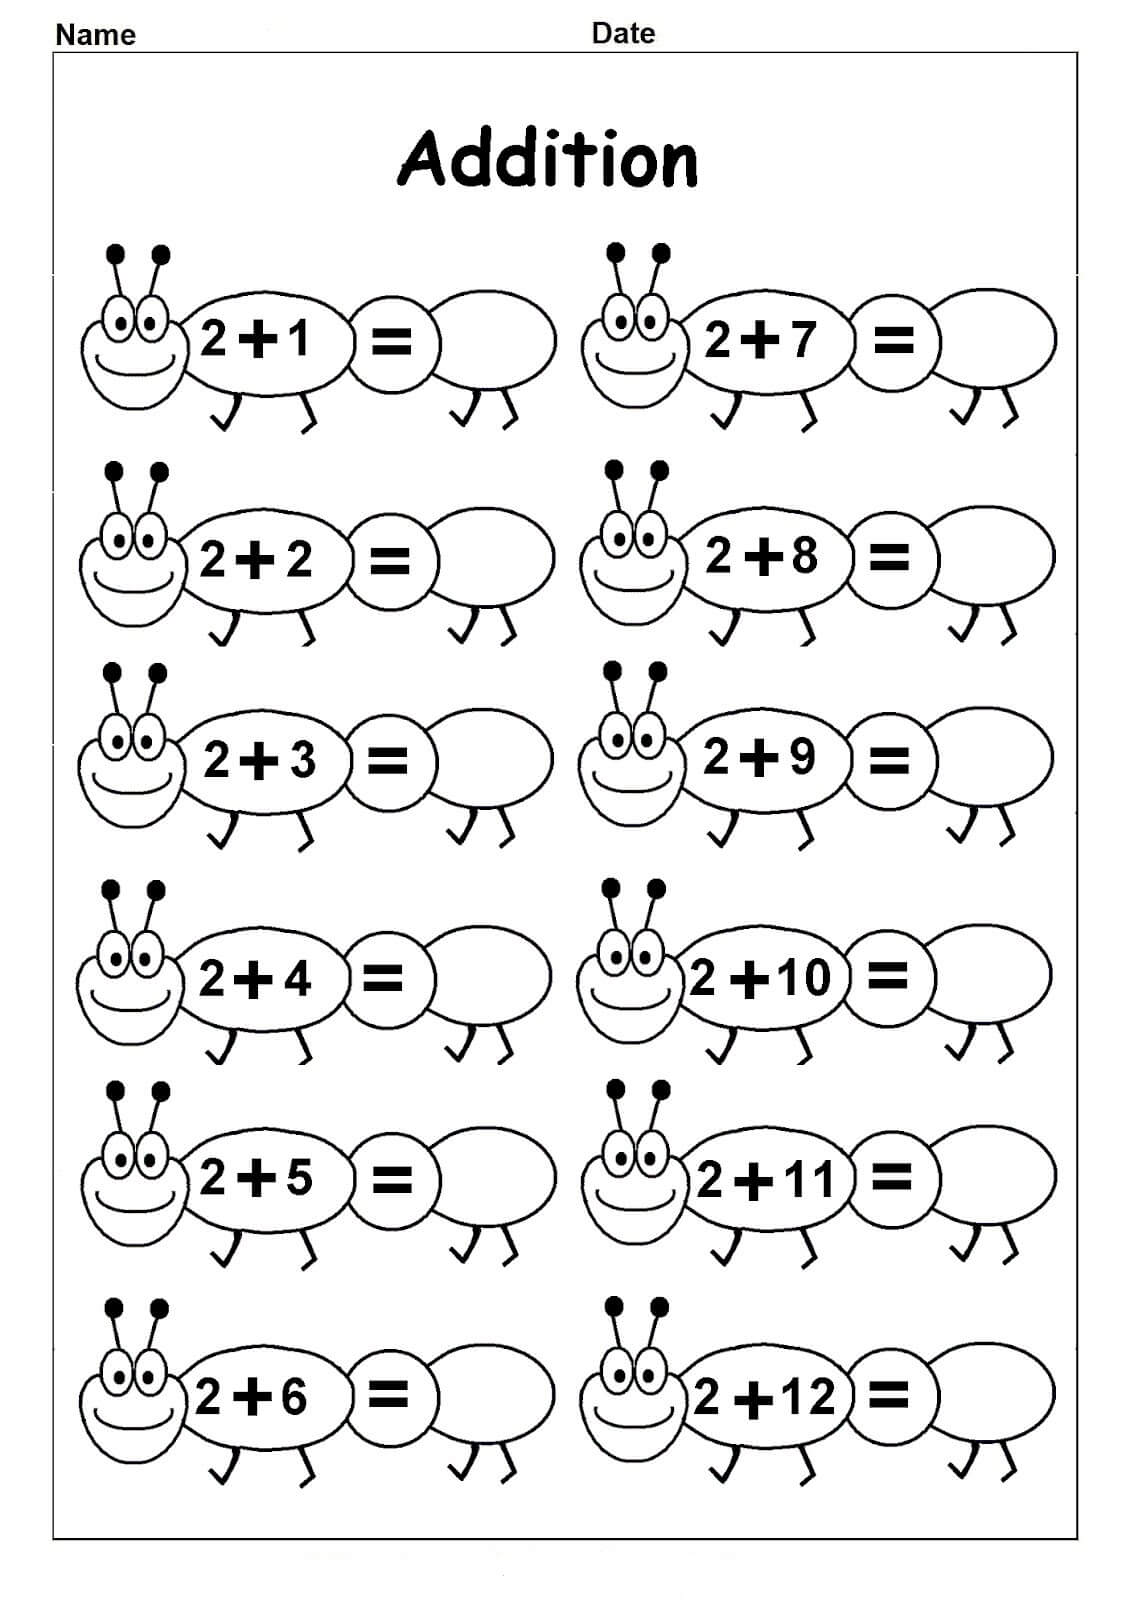 Free Printable Easy Addition Worksheet Preschool Crafts Fun Math Worksheets To Print Activity